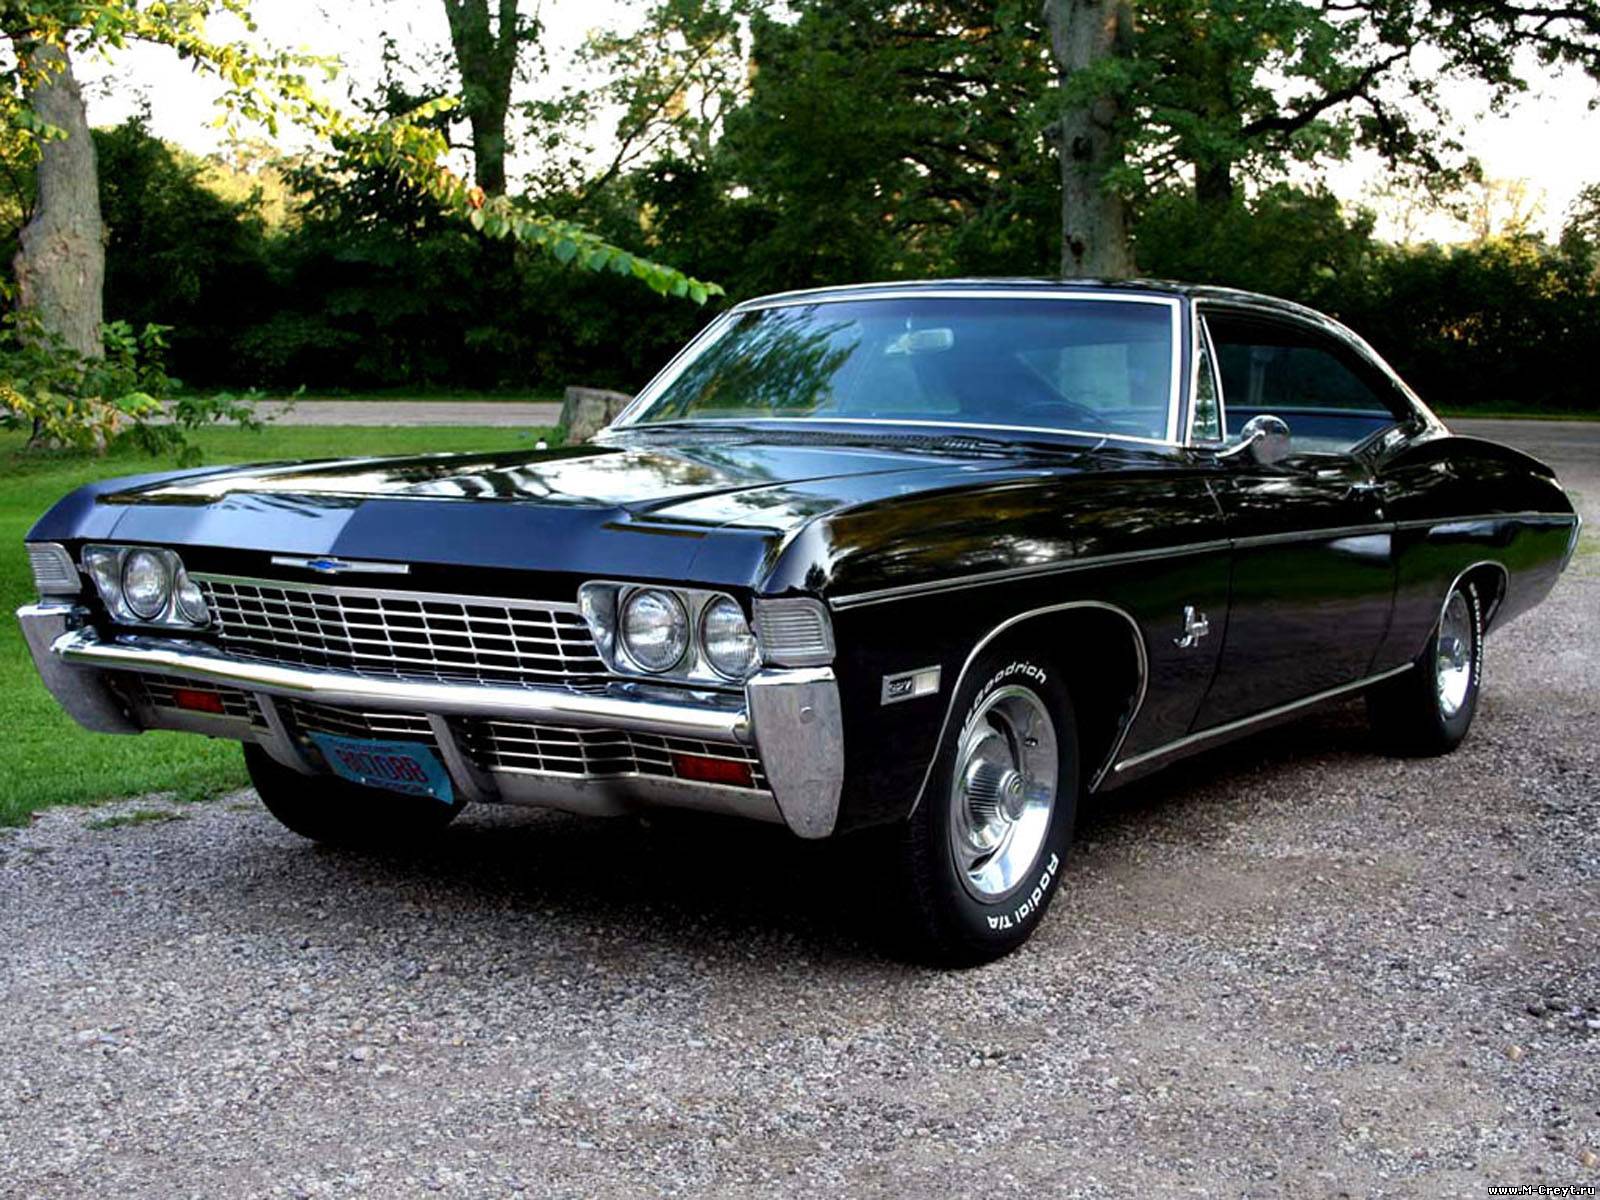 Best Chevy Impala Have Cbbfcffcb on cars Design Ideas with HD